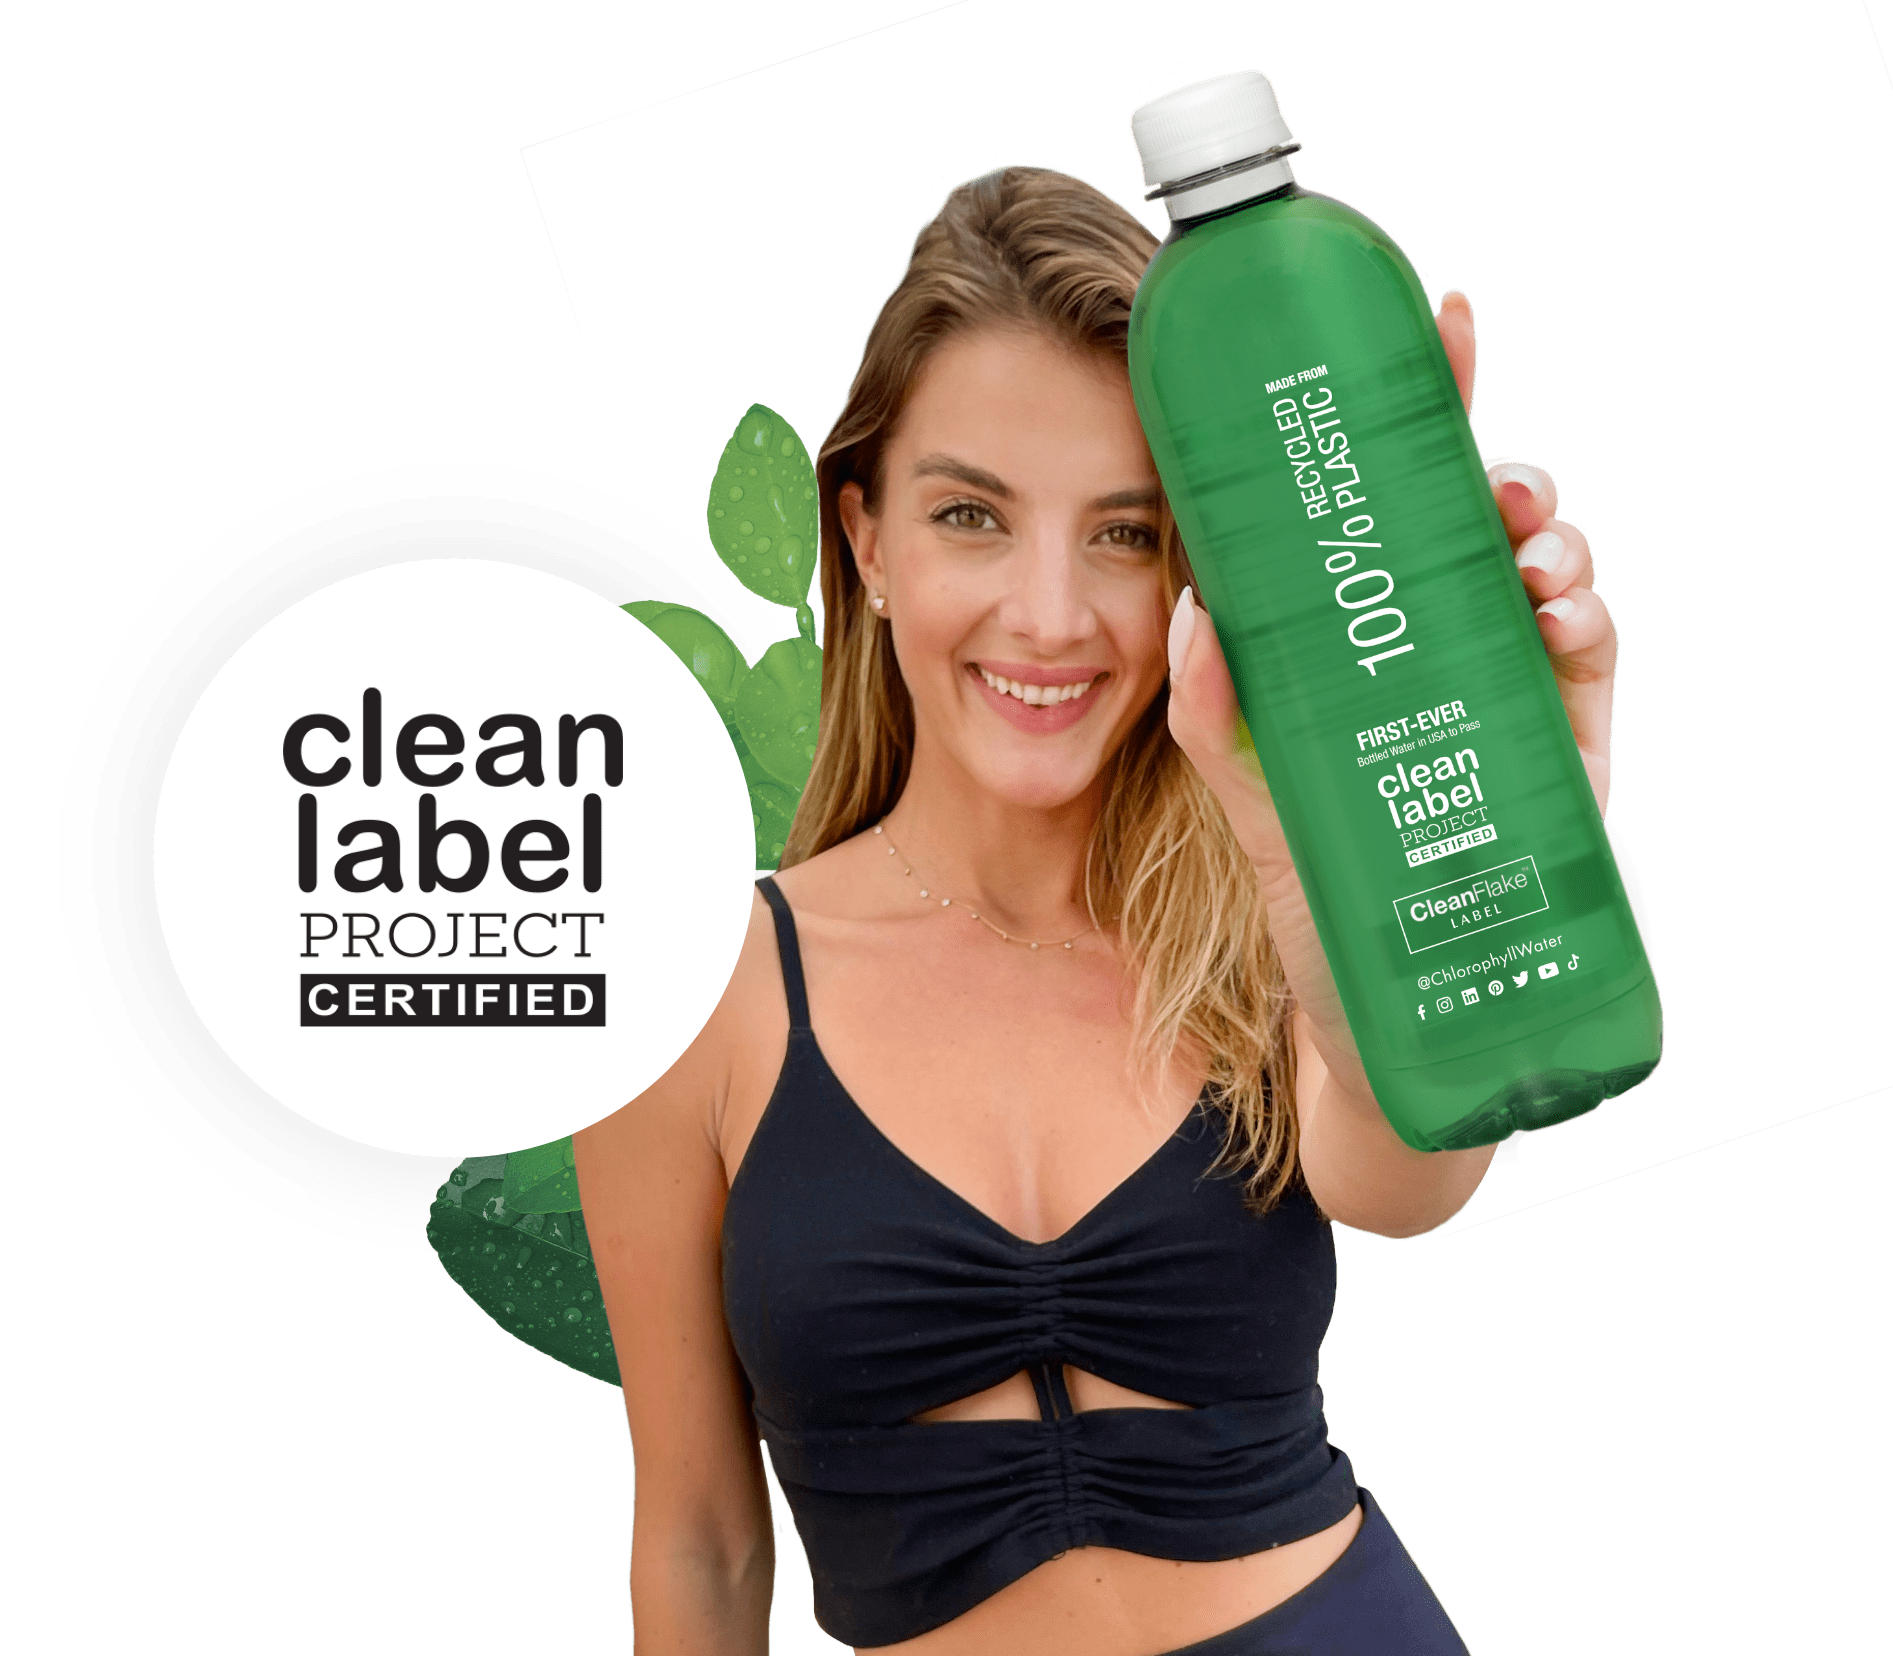 Clean label project certified